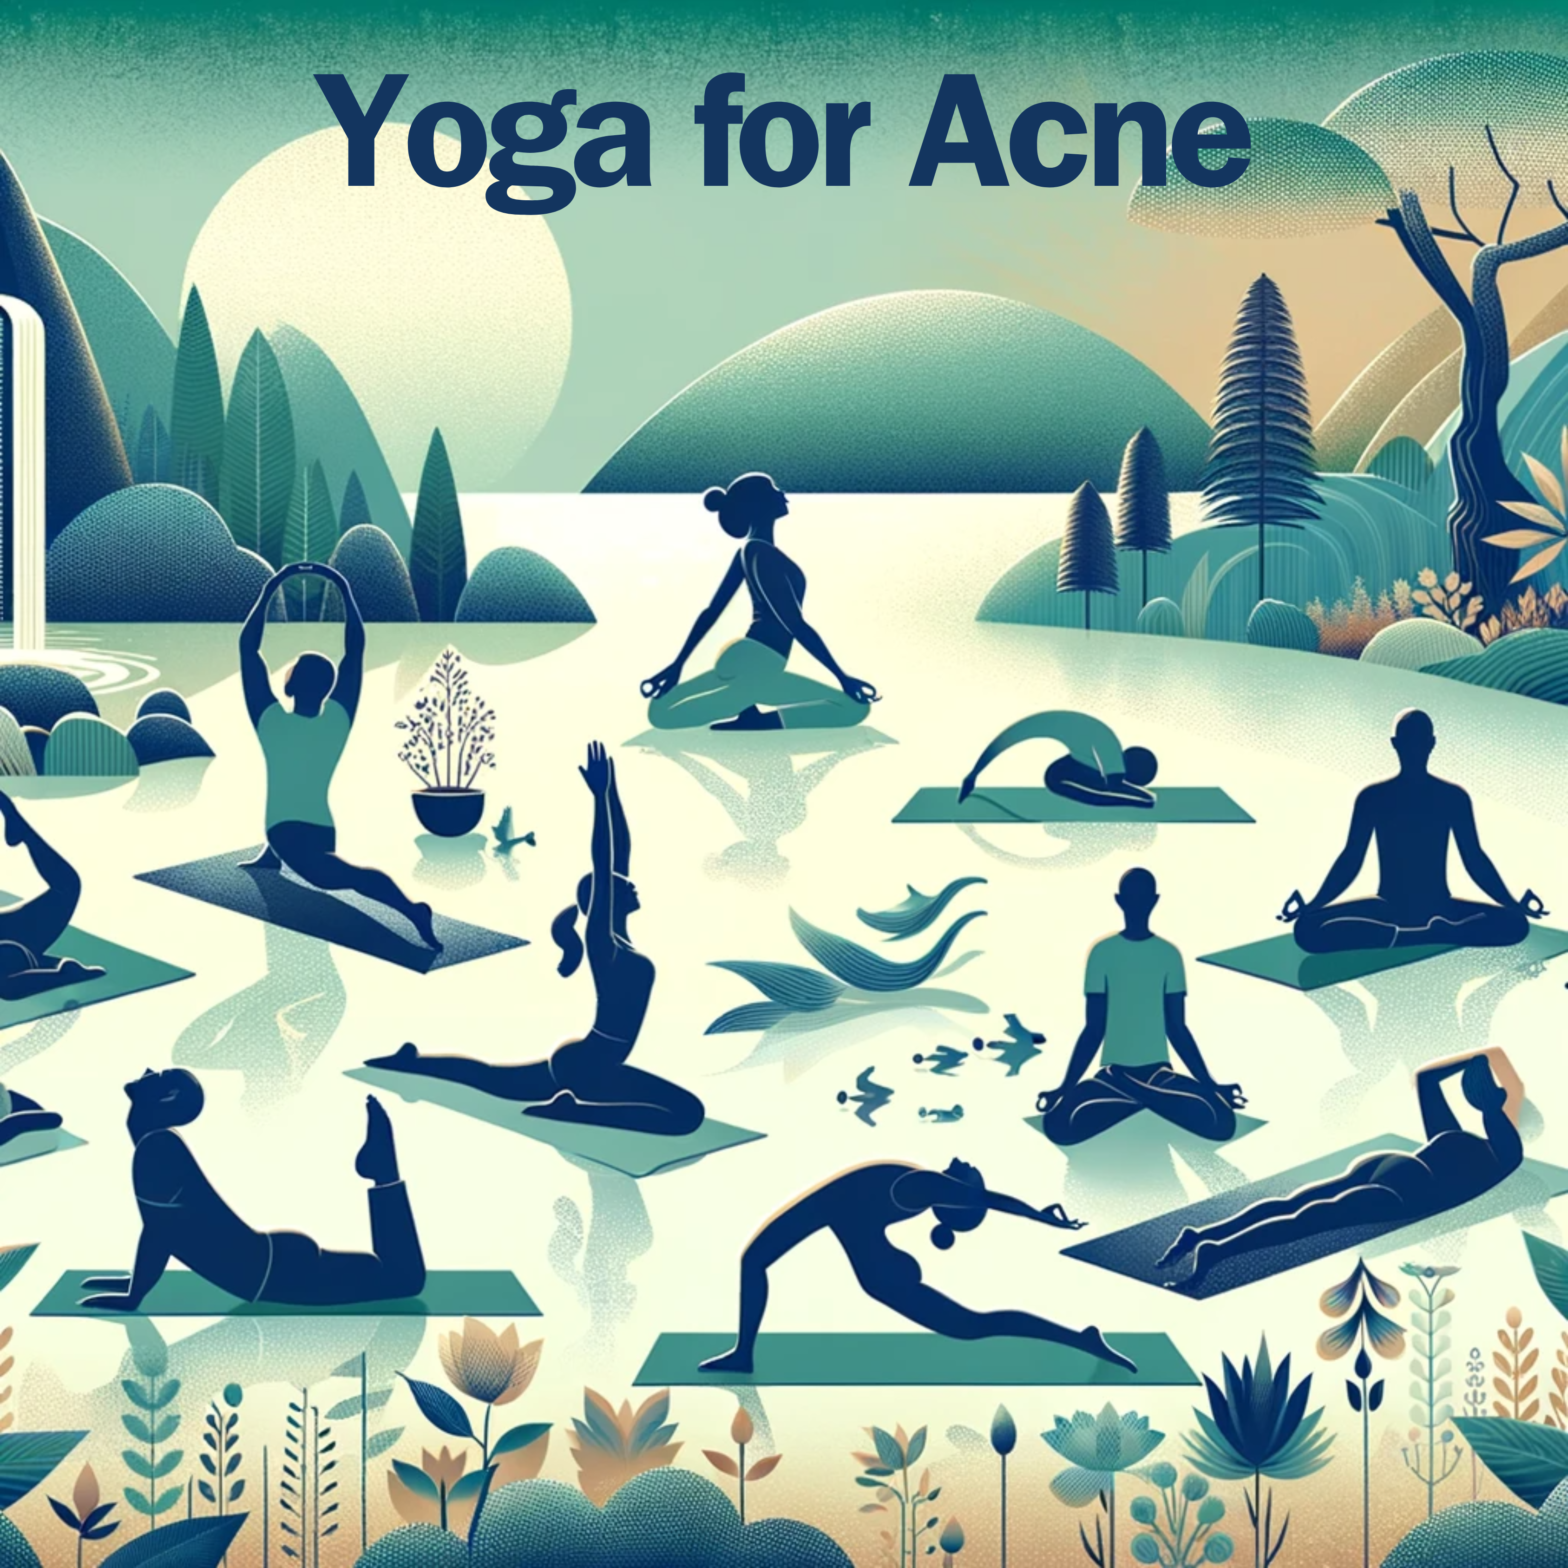 image illustrating various yoga poses in a serene and peaceful setting, beneficial for skin health and acne management. The image features a tranquil background with nature elements and a diverse group of individuals practicing yoga.